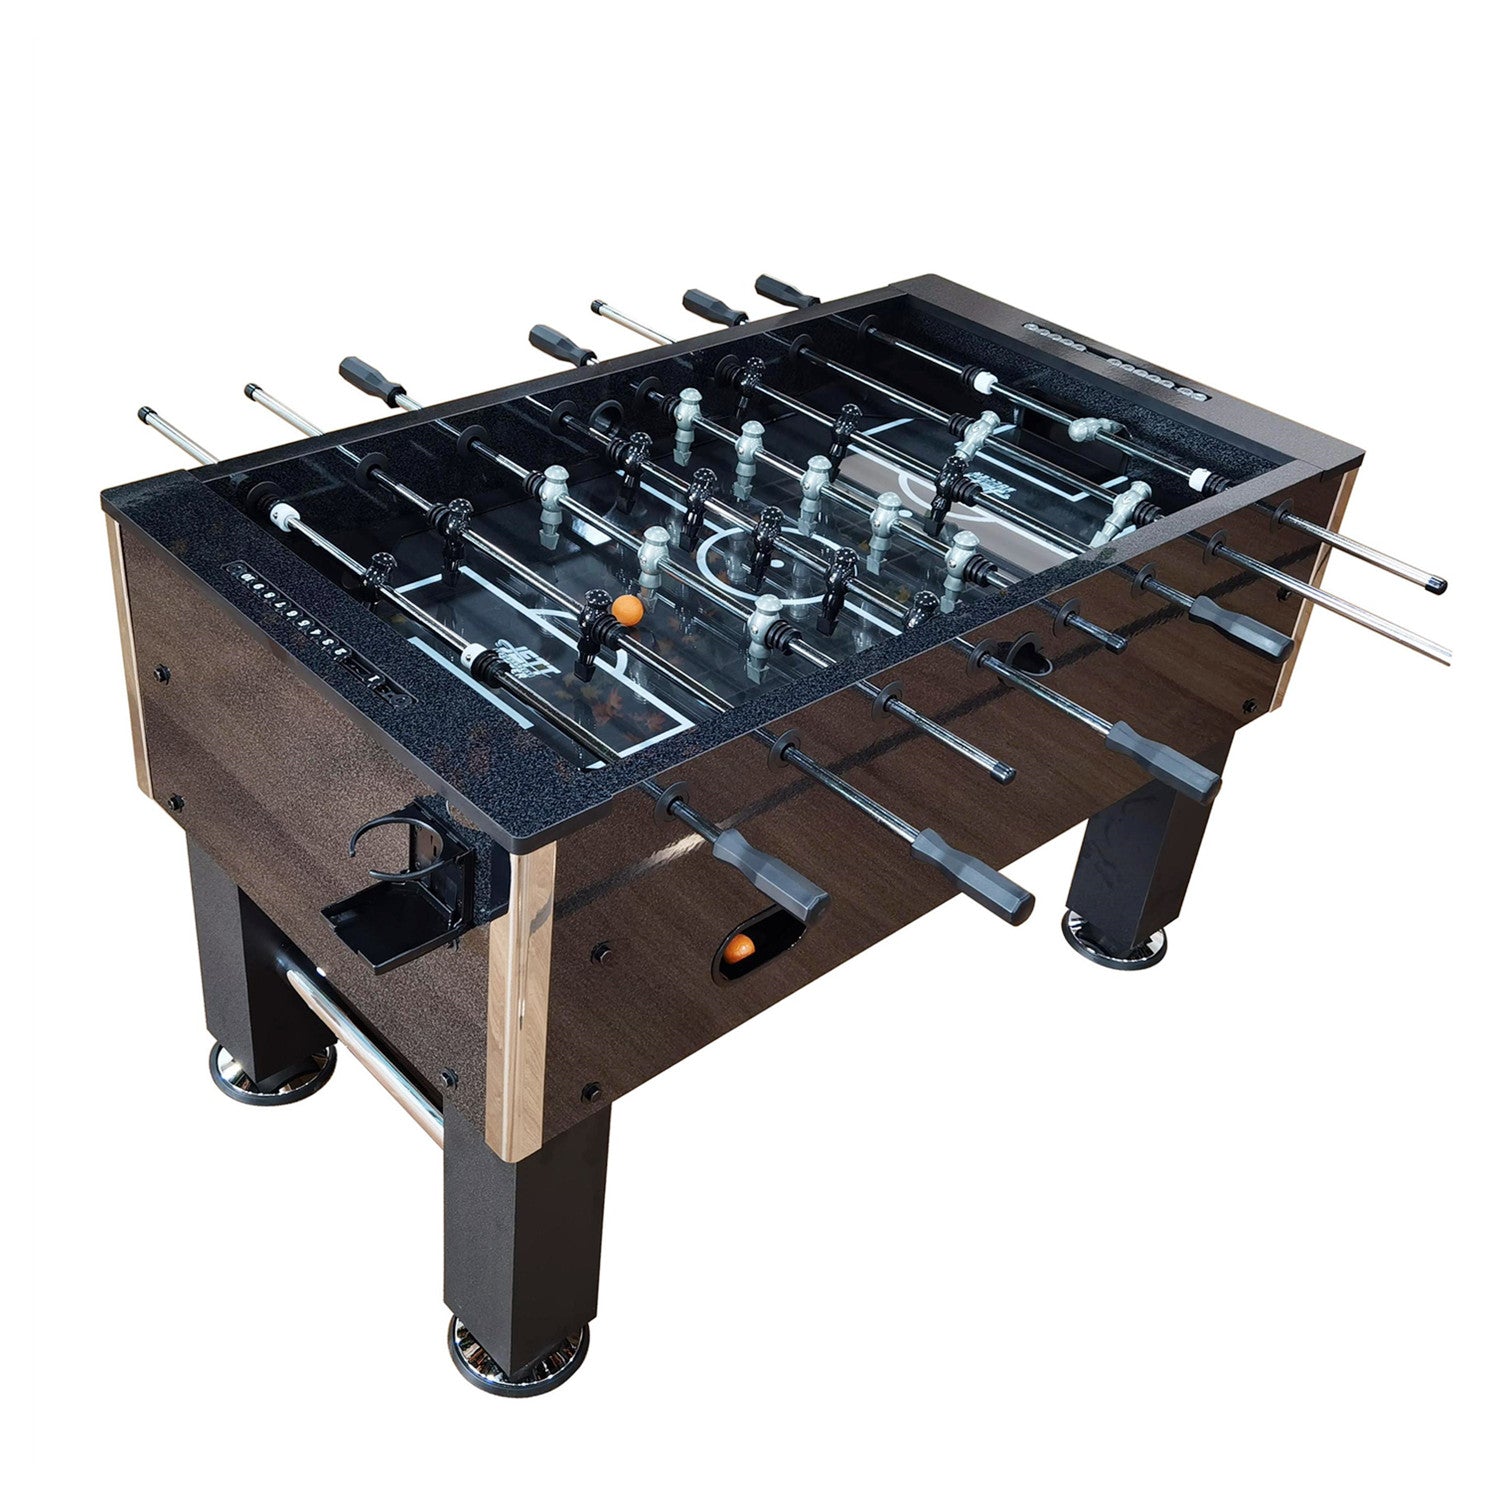 5FT Foosball Table-Glass Playing Surface